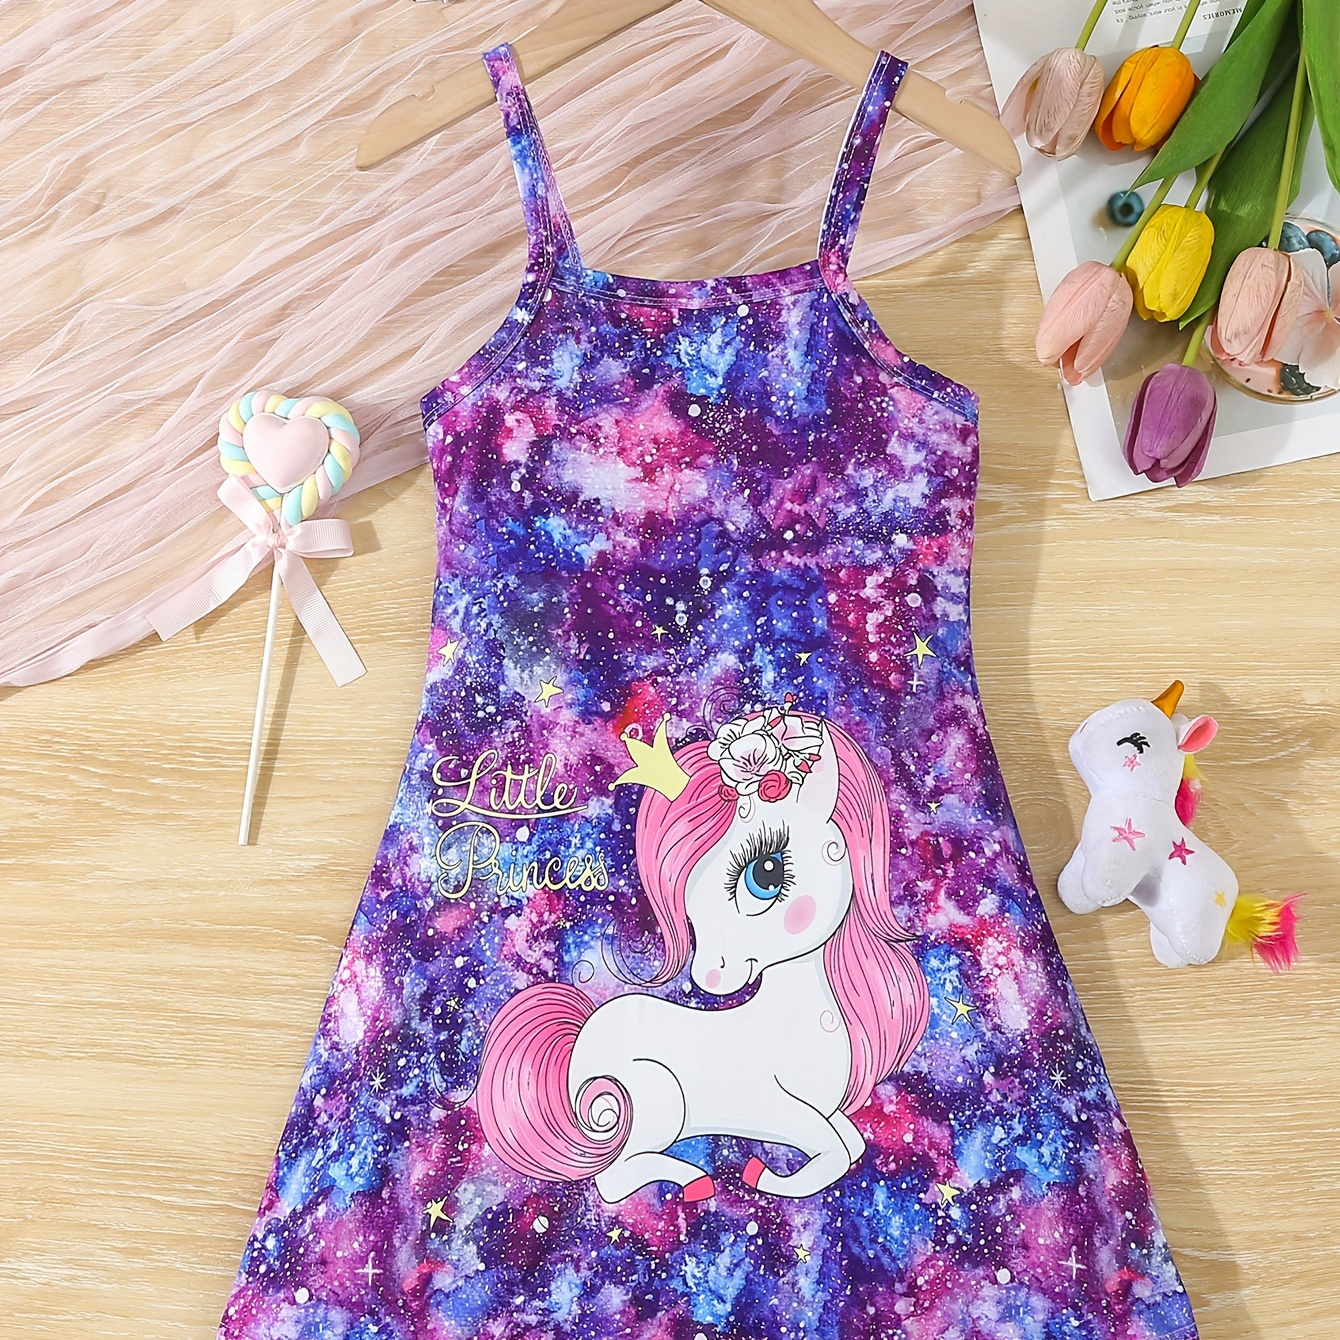 

Girls Unicorn Spaghetti Strap Dress, Casual Style, Galaxy Print, Twirl Sundress For Kids, Colorful Summer Outfit